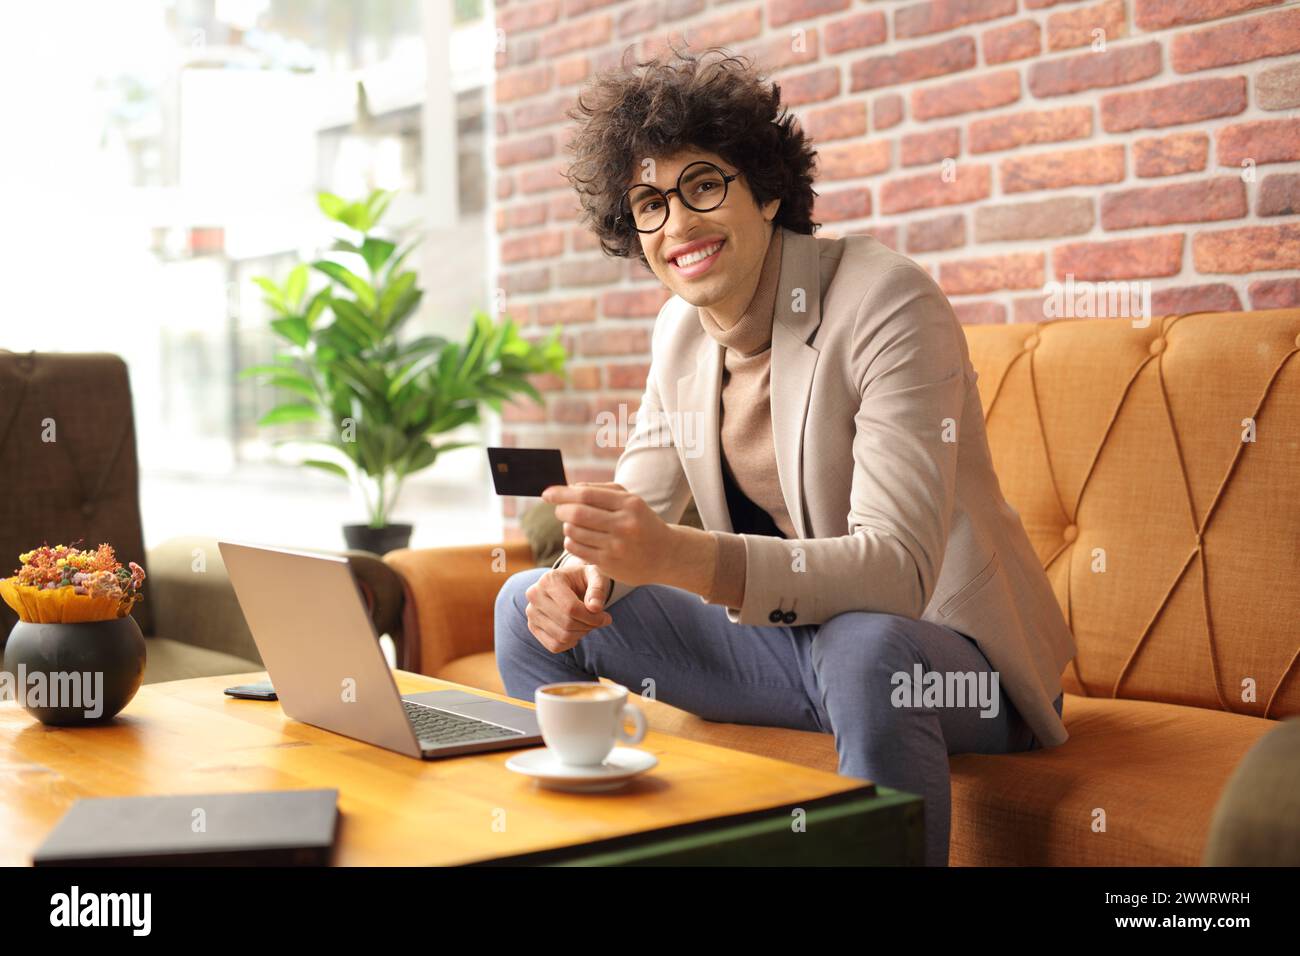 Smiling young man sitting in a cafe using a laptop computer and holding a credit card, online shopping concept Stock Photo